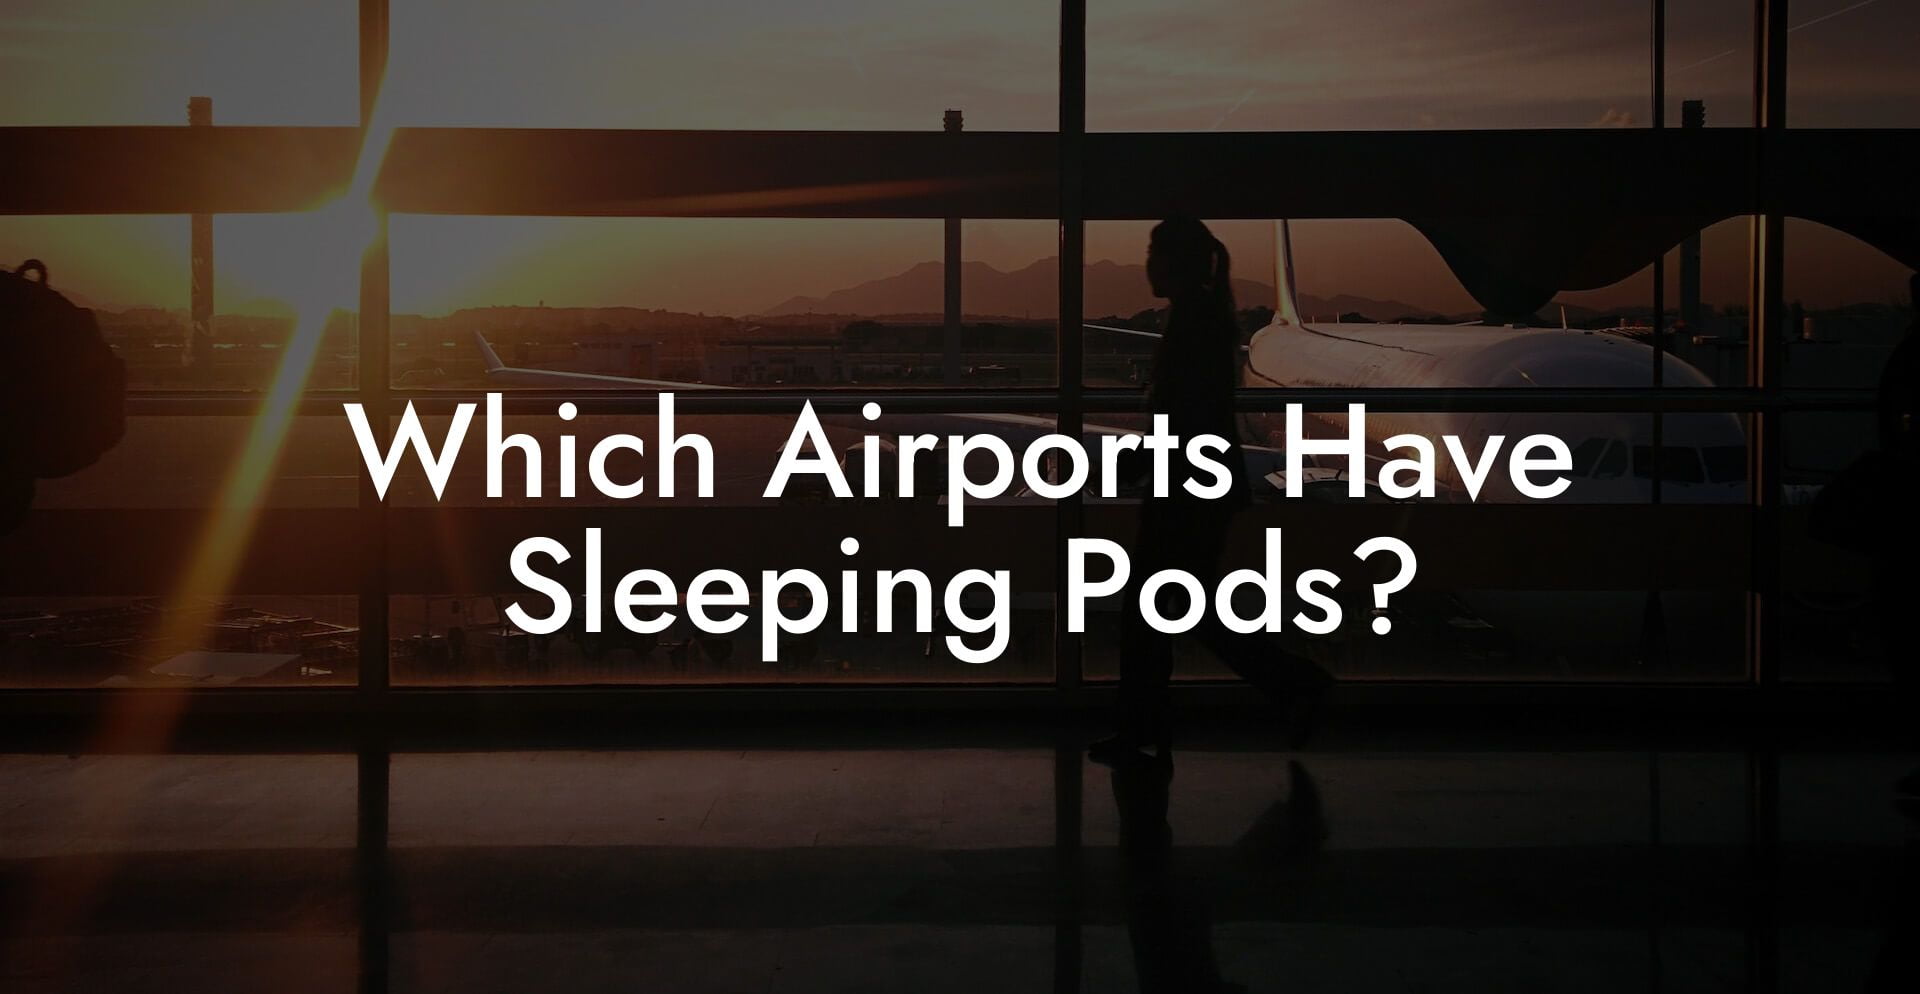 Which Airports Have Sleeping Pods?